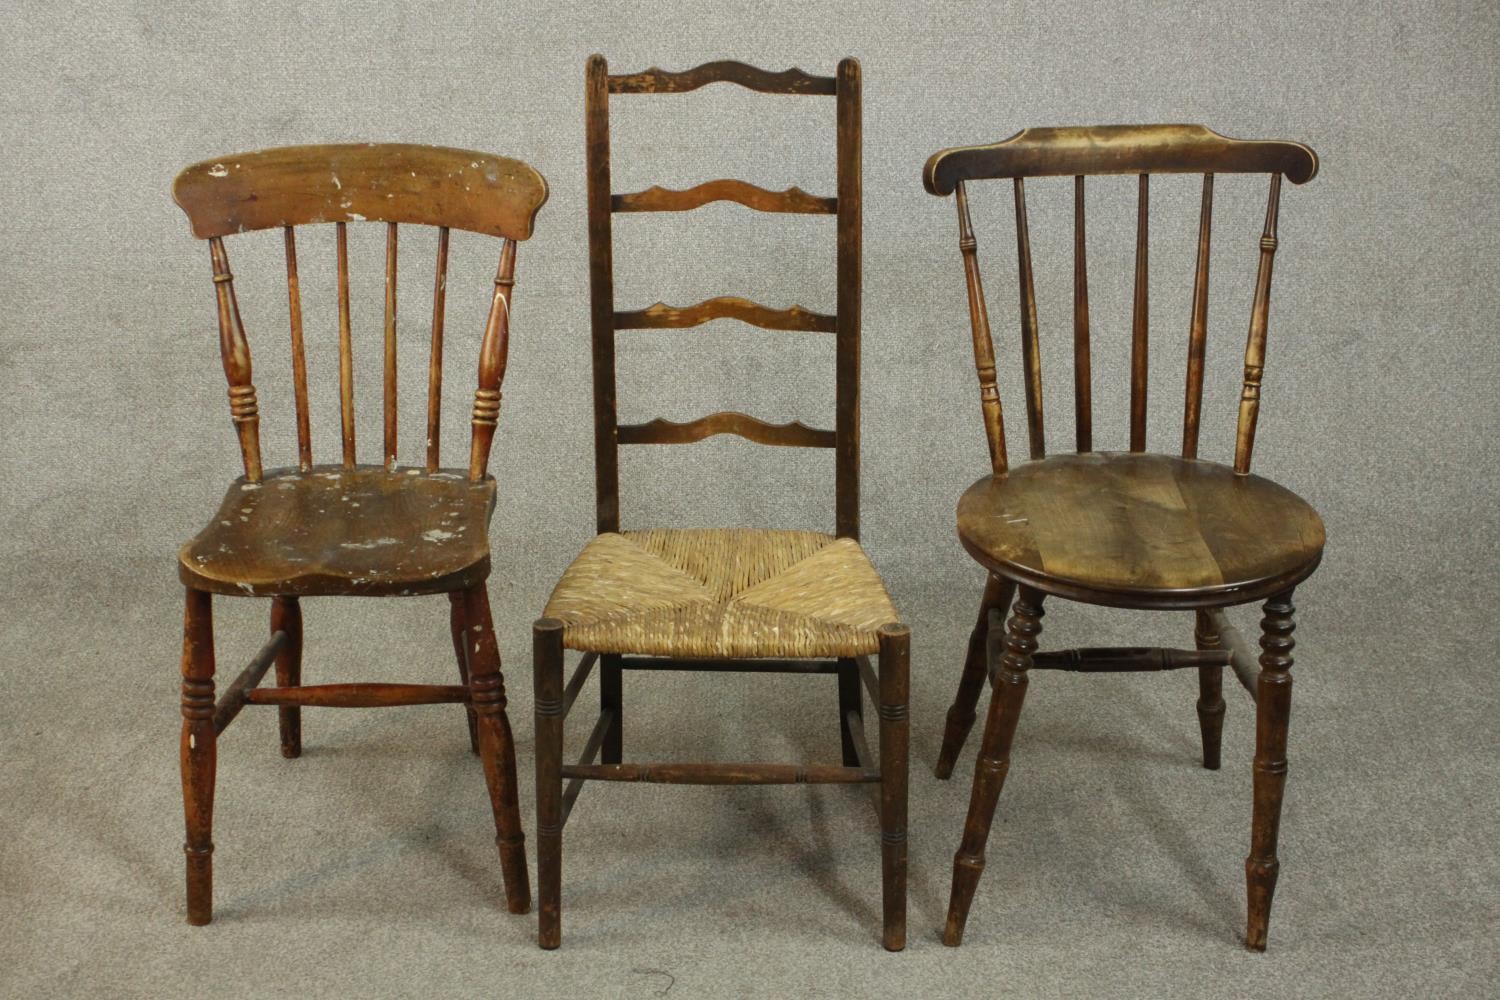 A miscellaneous collection of three 19th century side chairs.